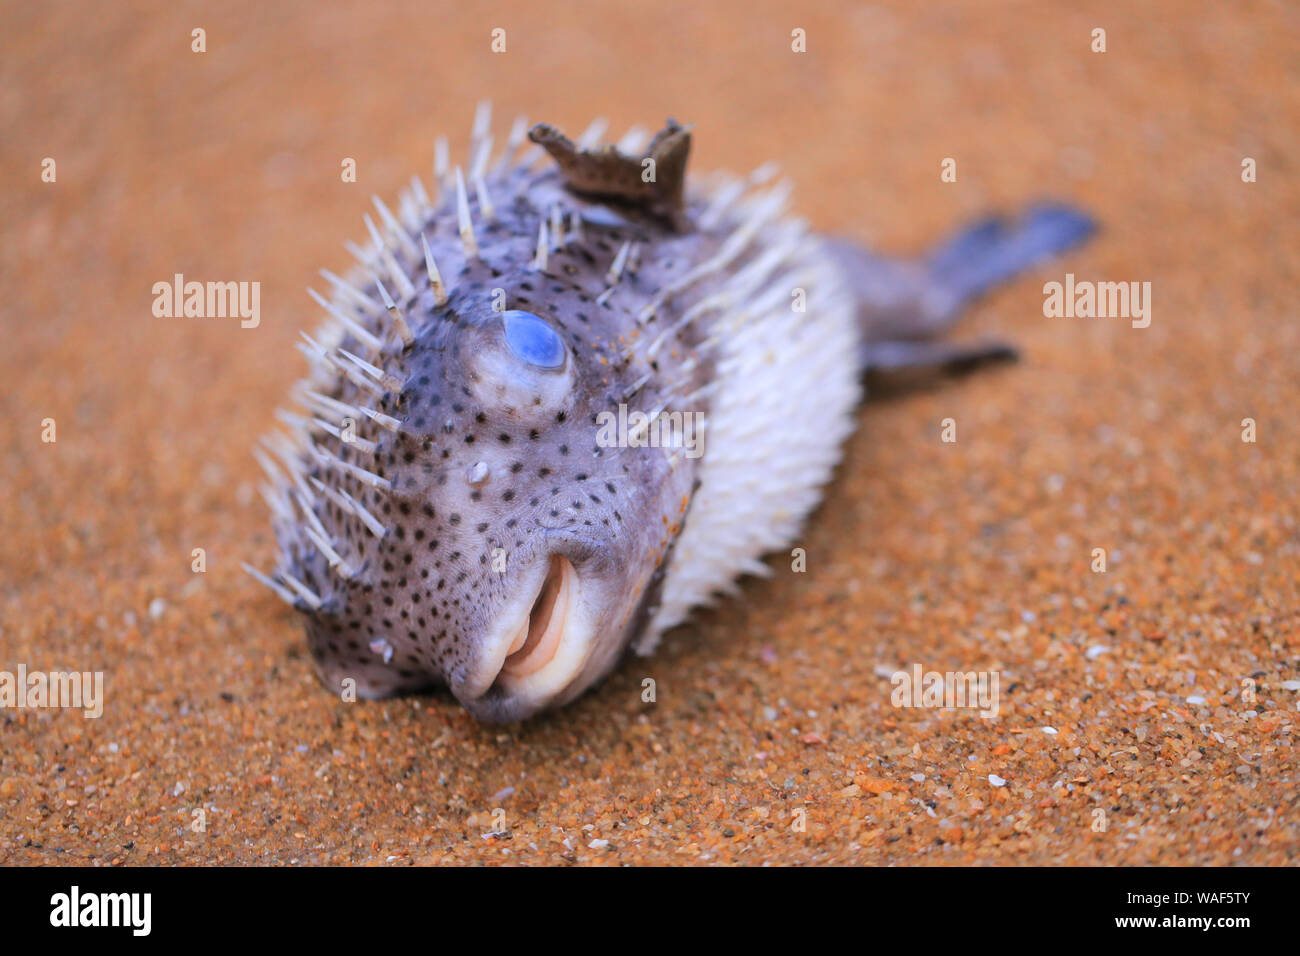 Dead puffer fish on the sand Stock Photo